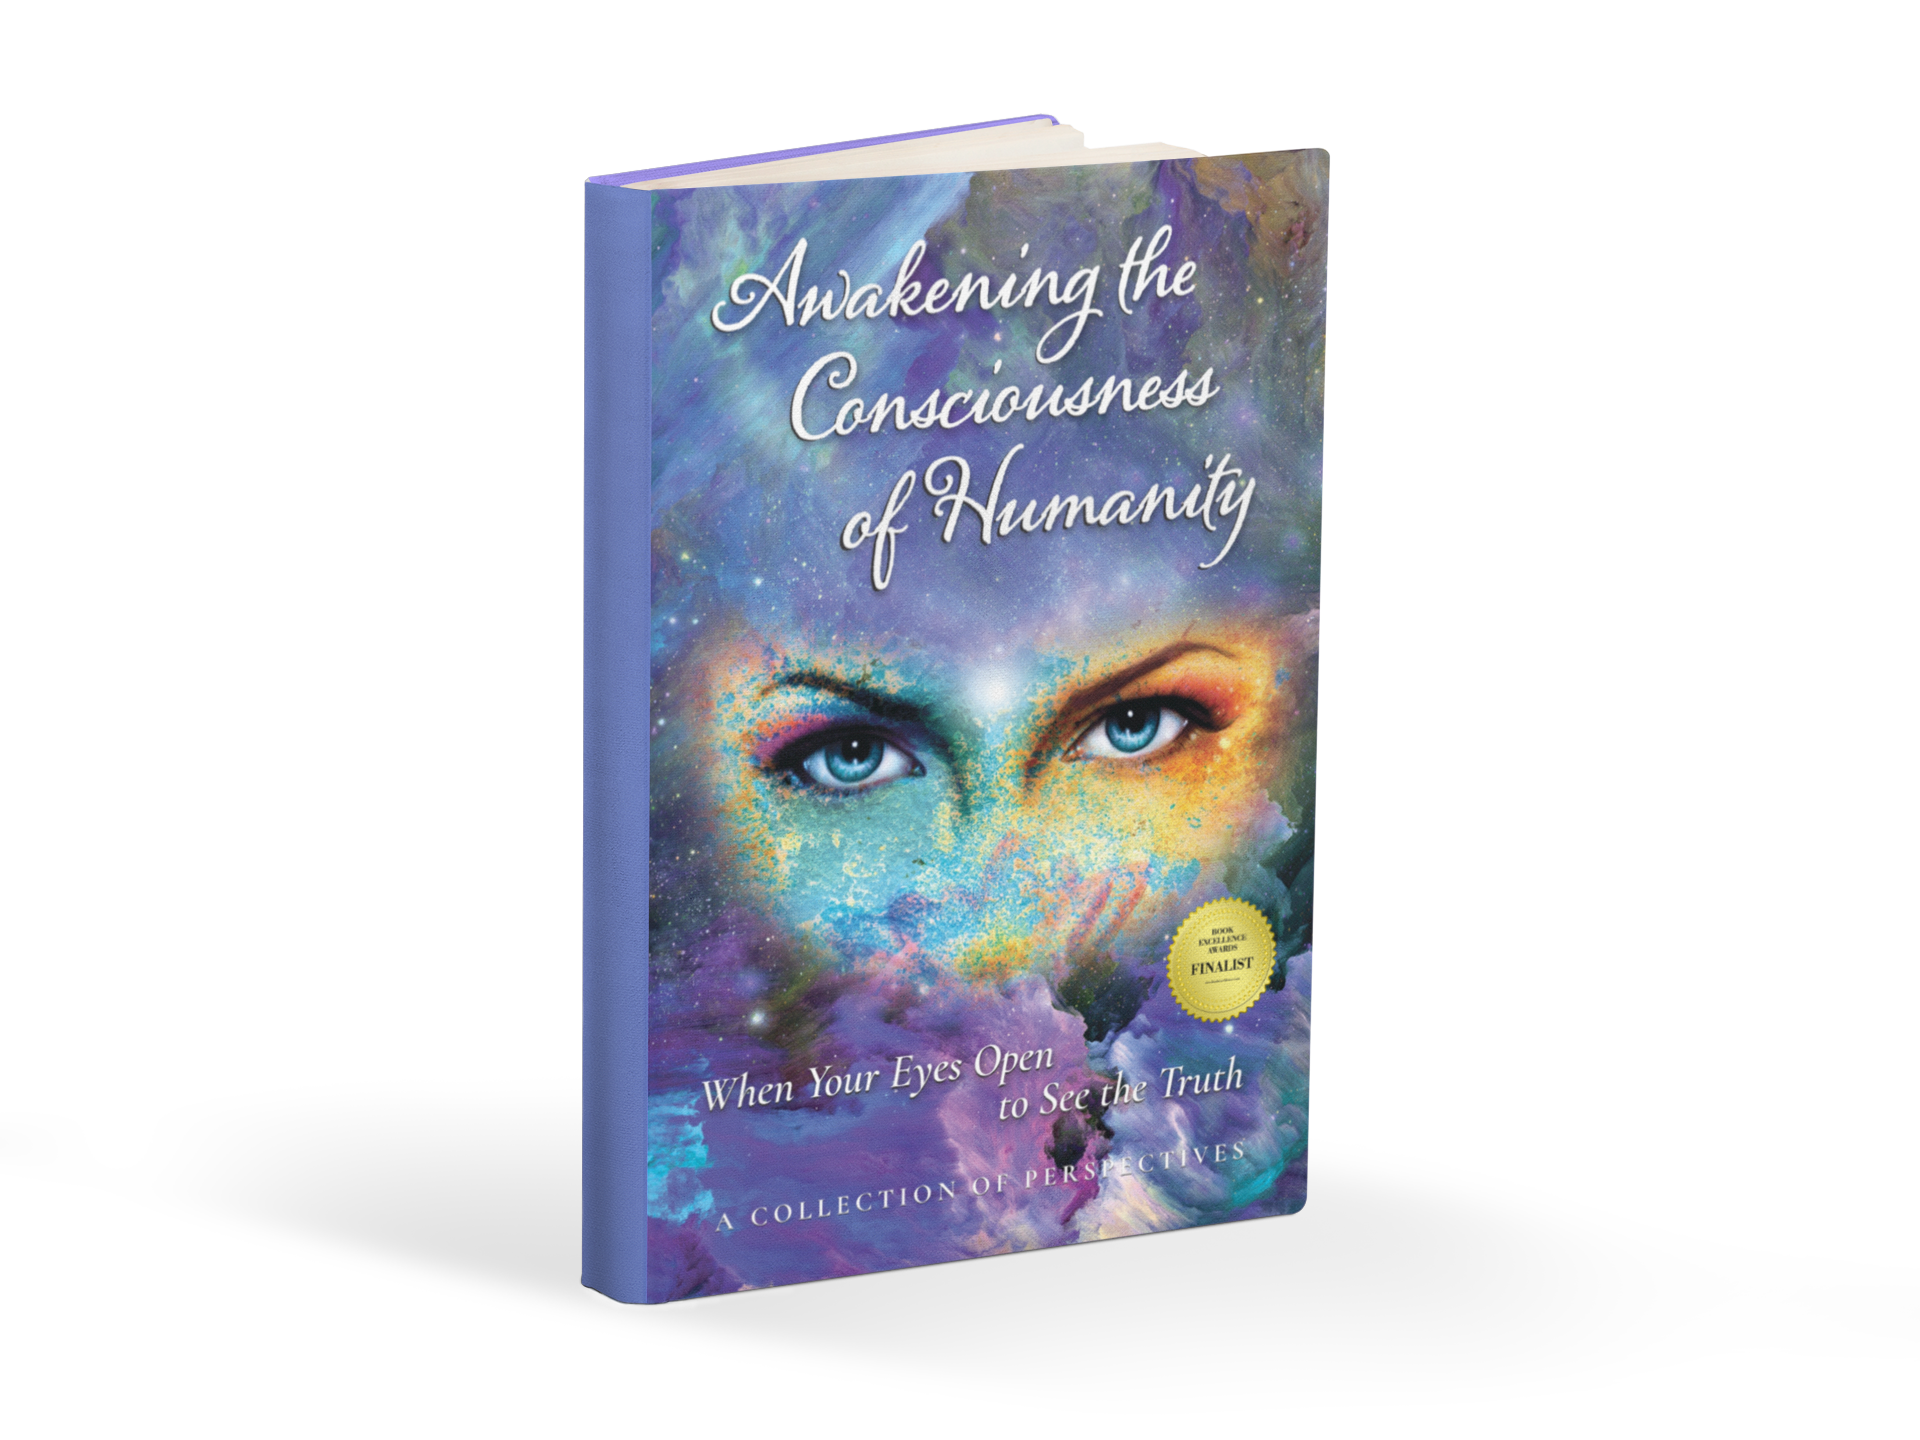 Awakening the Consciousness of Humanity ~ When Your Eyes Open To See The Truth Recognized as a Finalist in International Book Contest